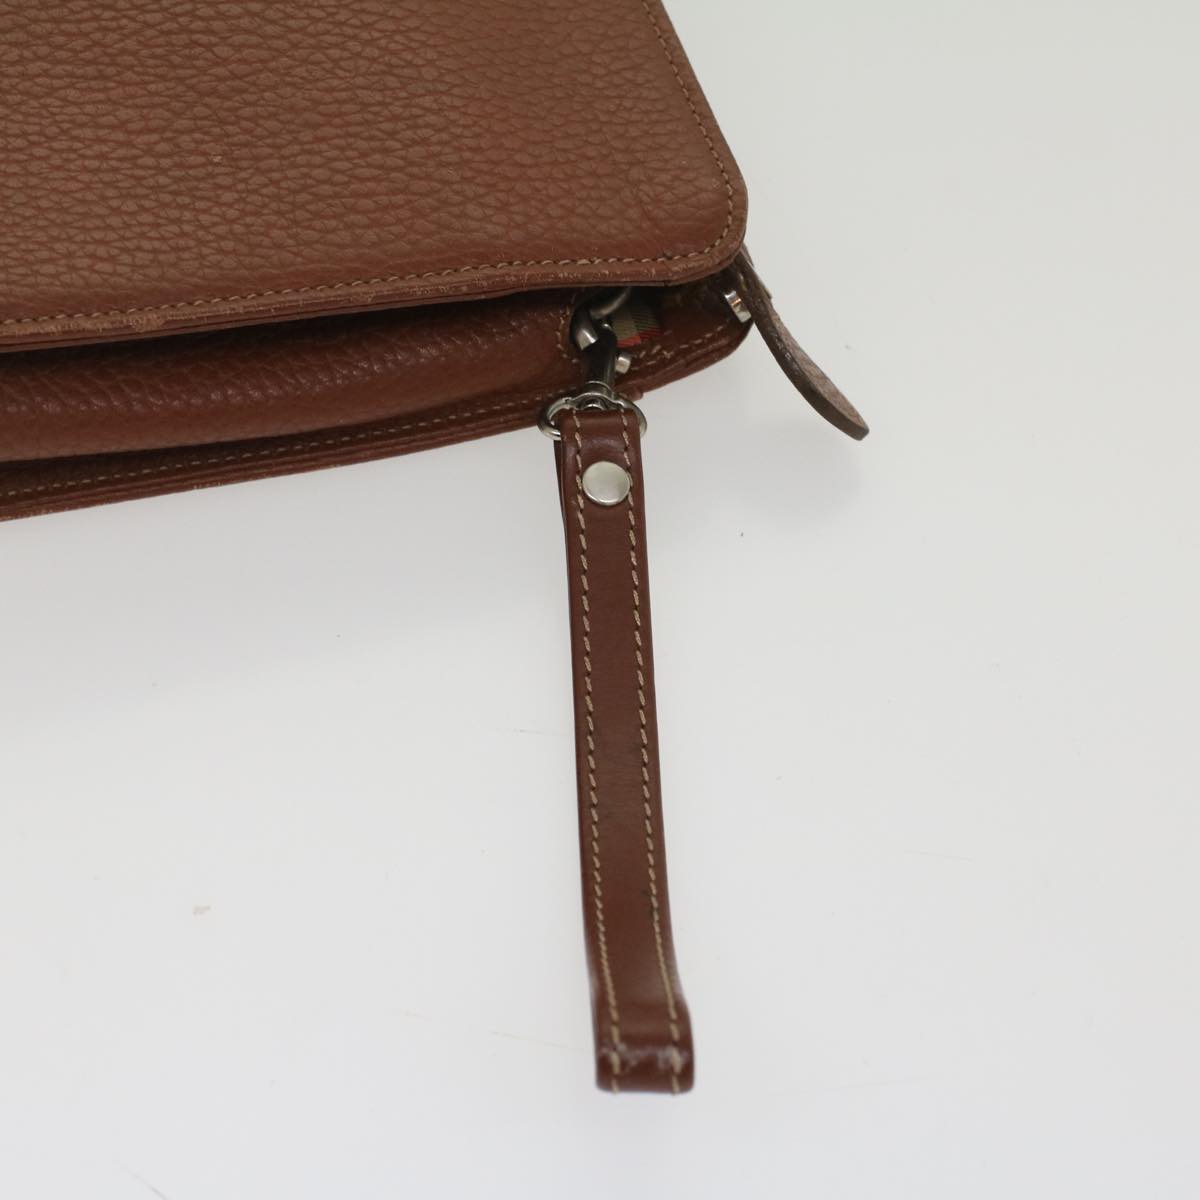 Burberrys Clutch Bag Leather Brown Auth bs8539